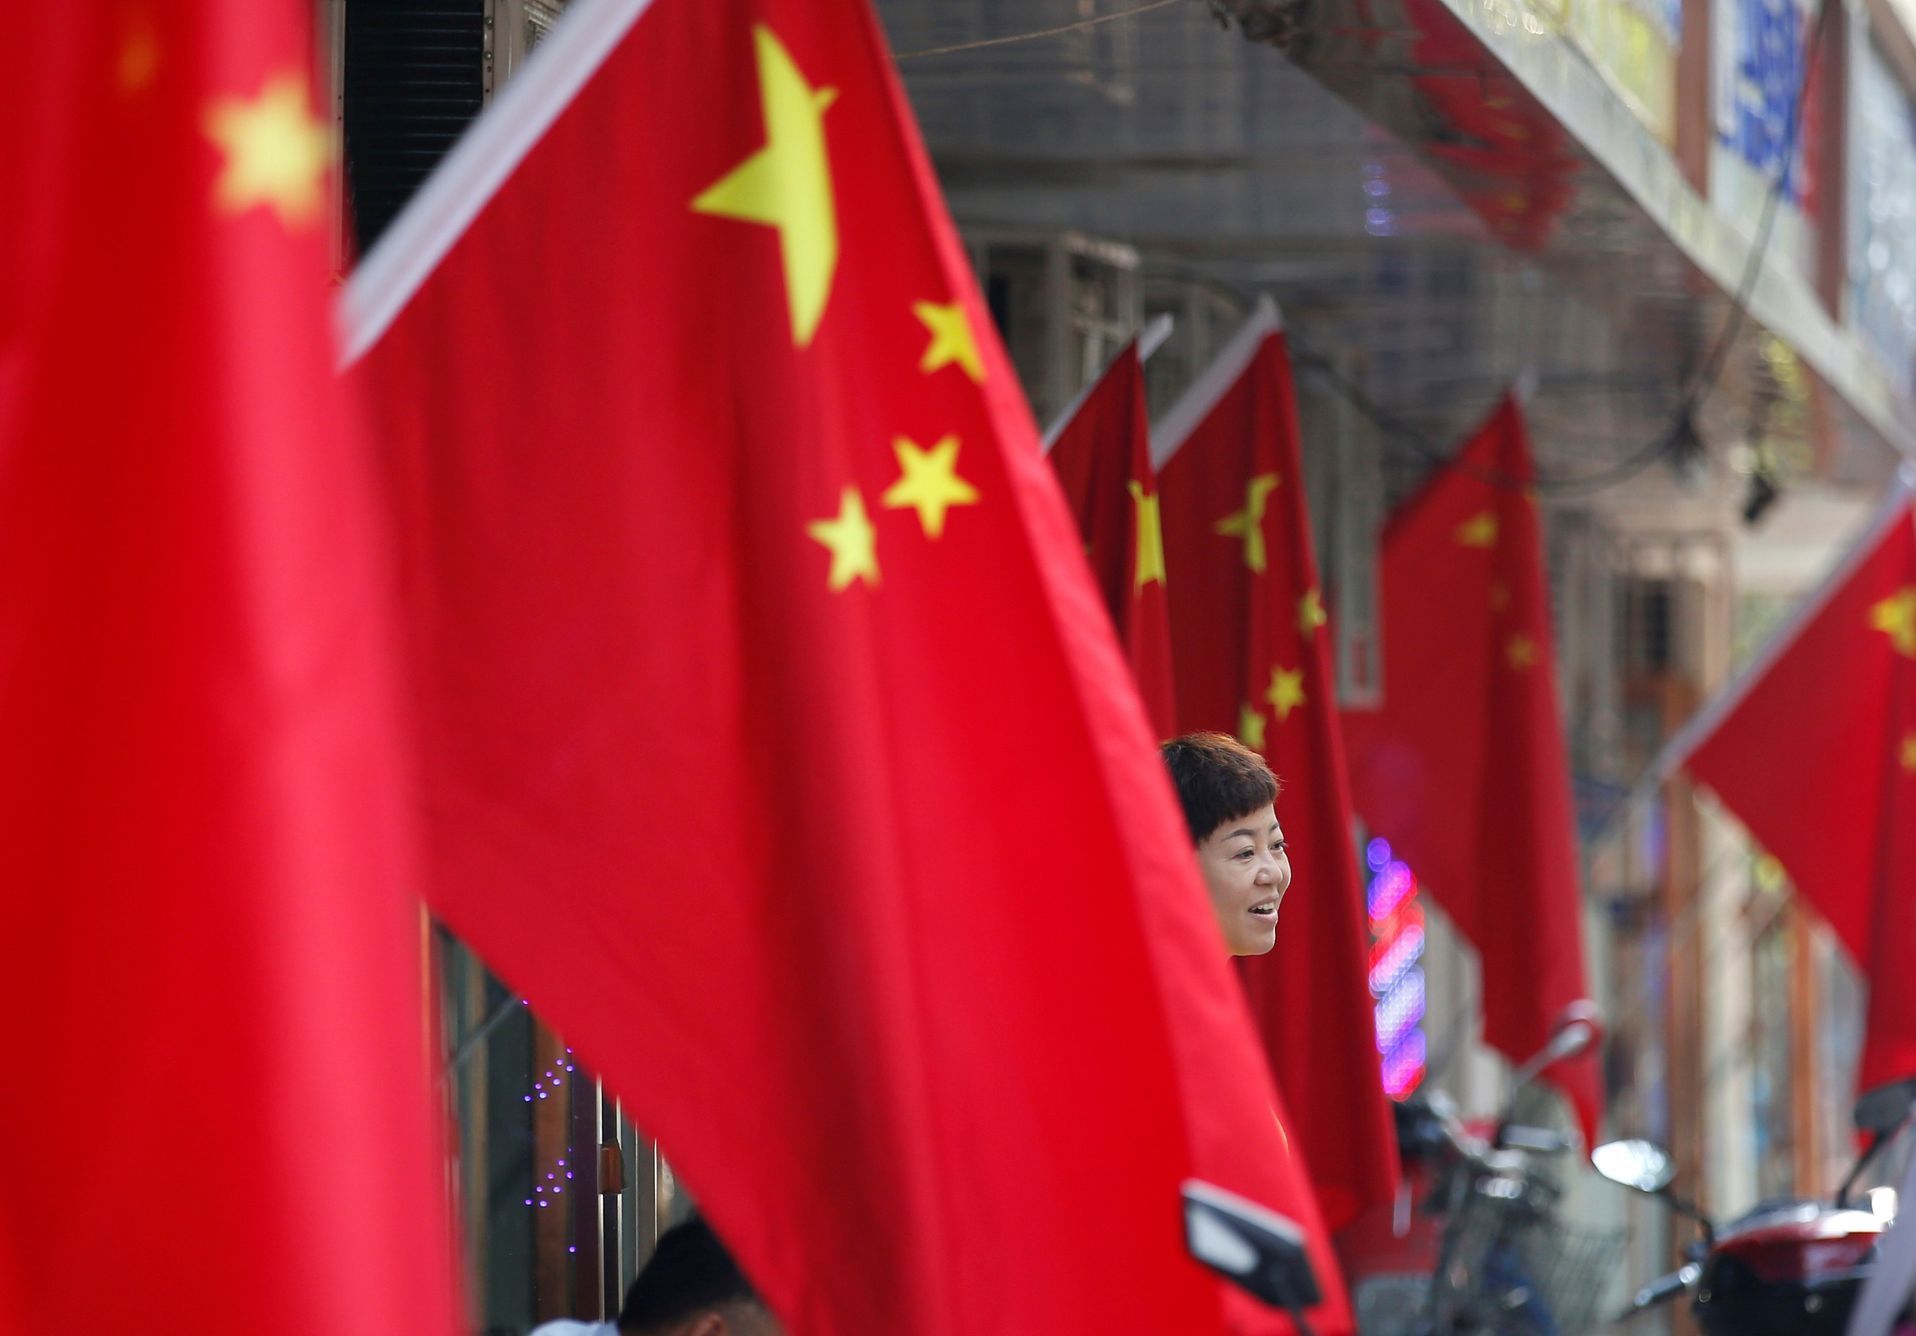 A woman stands amid Chinese national flags ahead of the 70th founding anniversary of People's Republic of China in Beijing